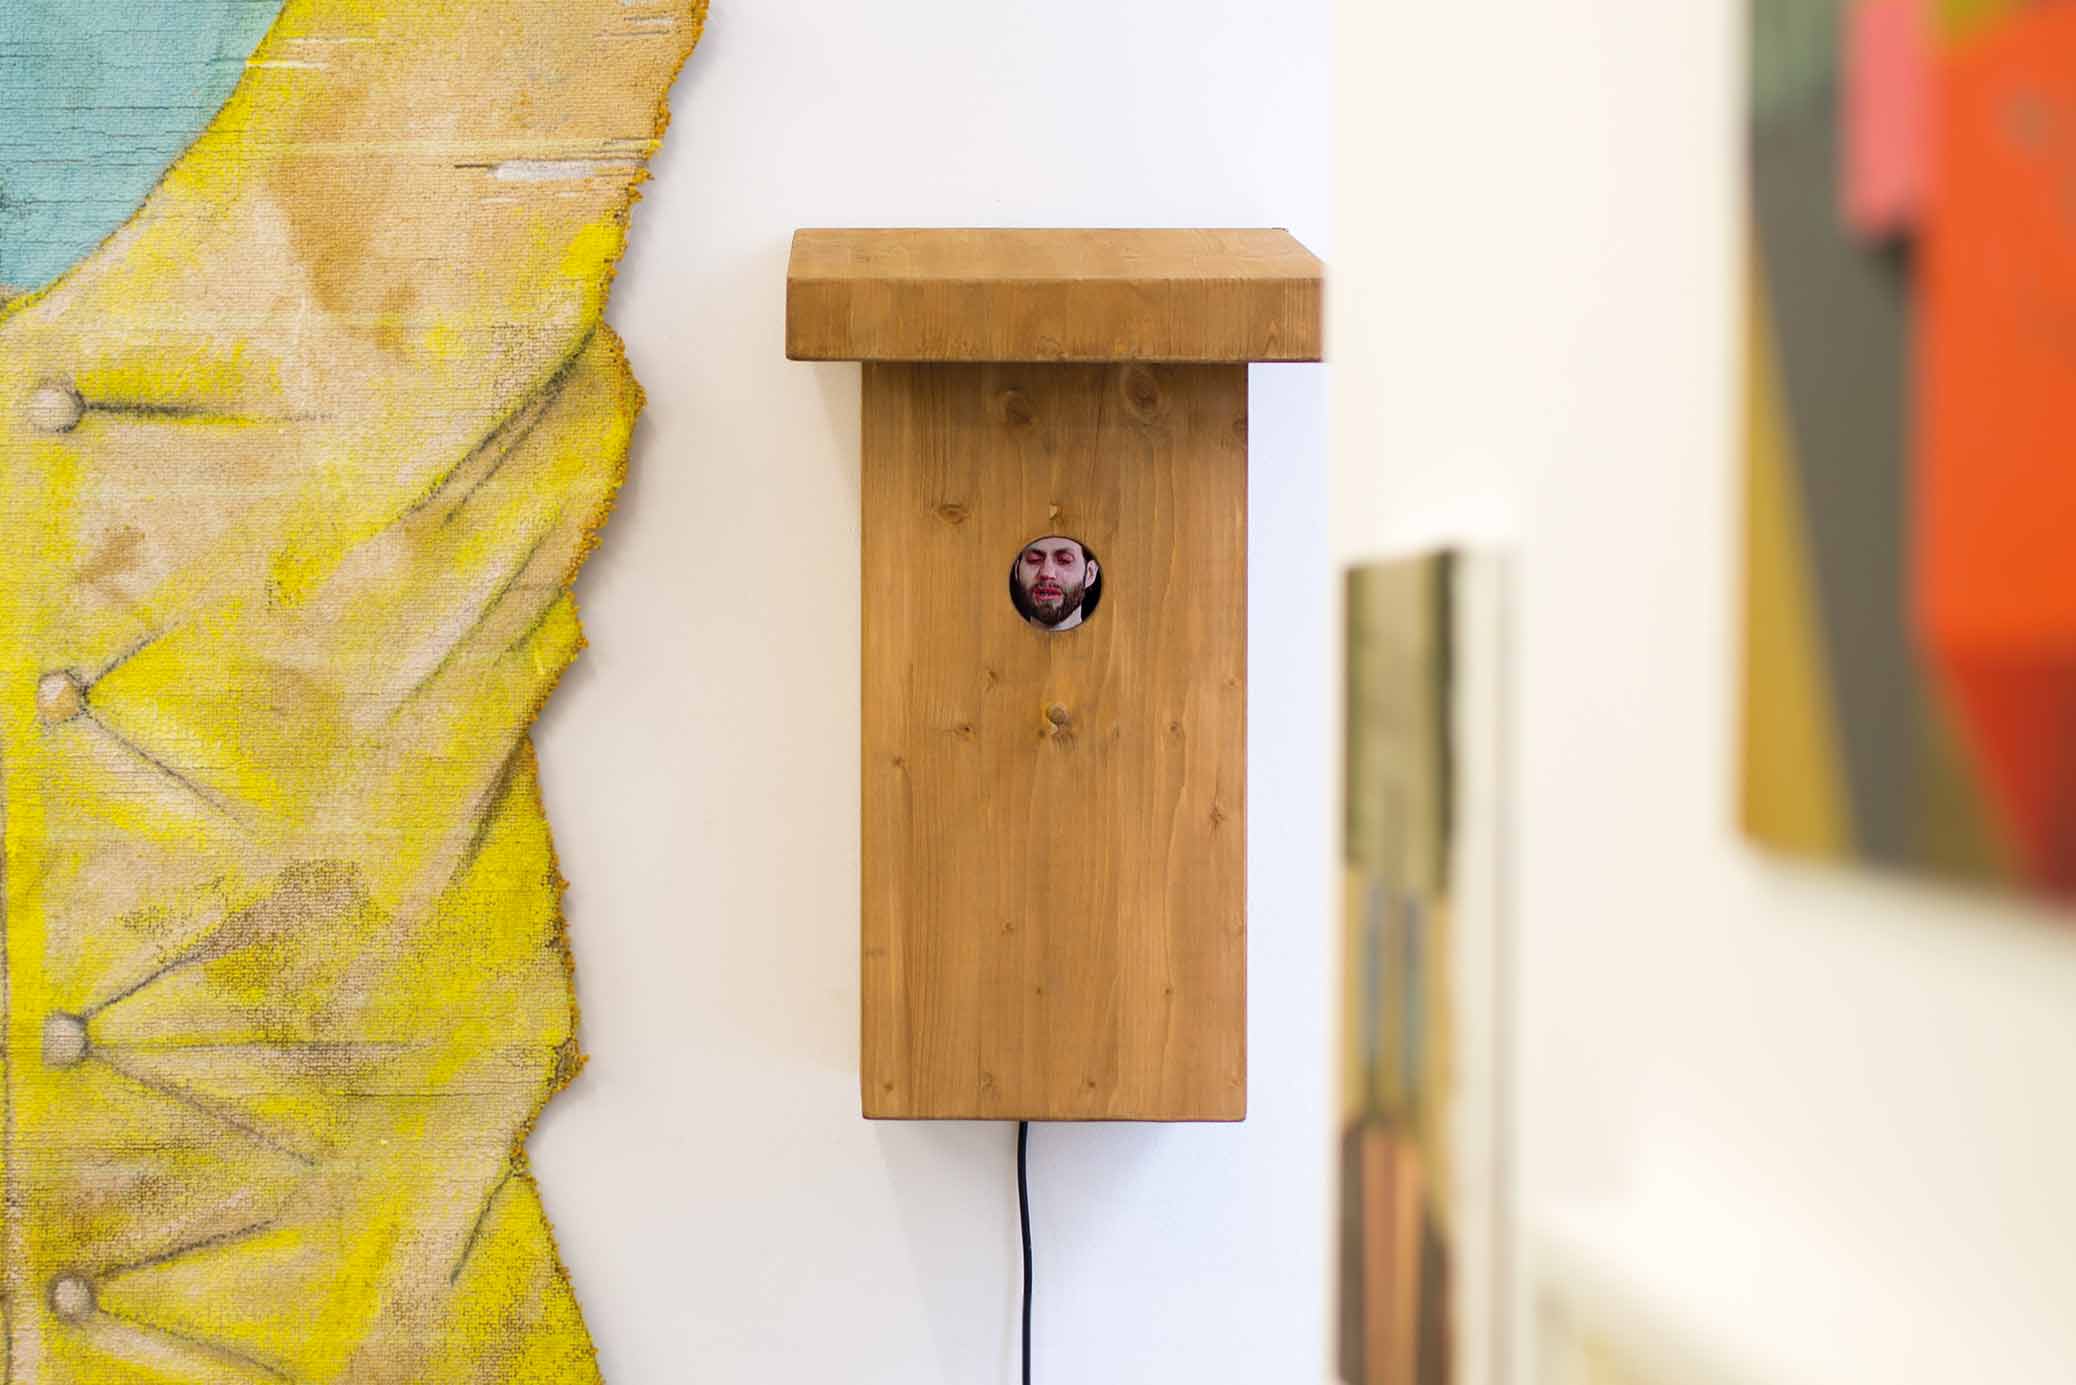 Nesting Box, video sculpture by Björn Perborg with crying man inside.